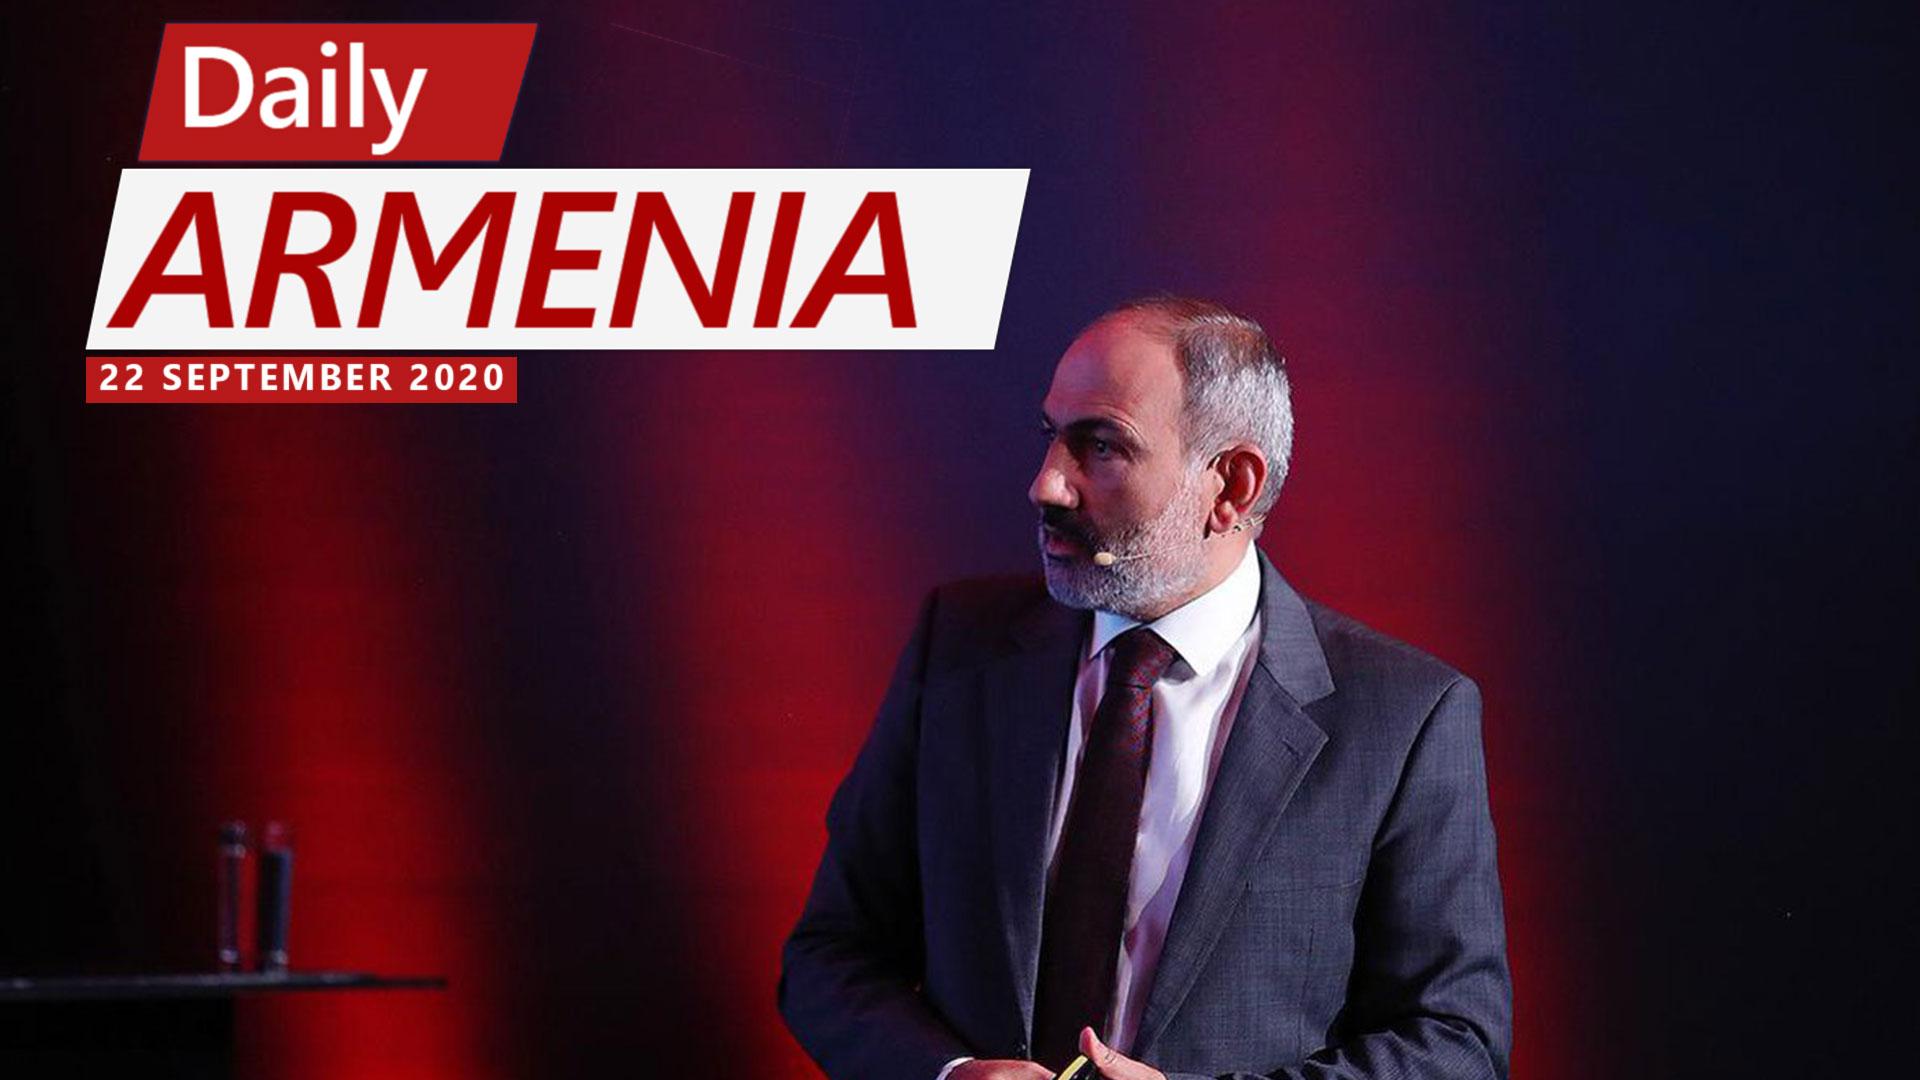 On 75th Anniversary of the UN, Pashinyan Recalls People’s Right to Self-Determination